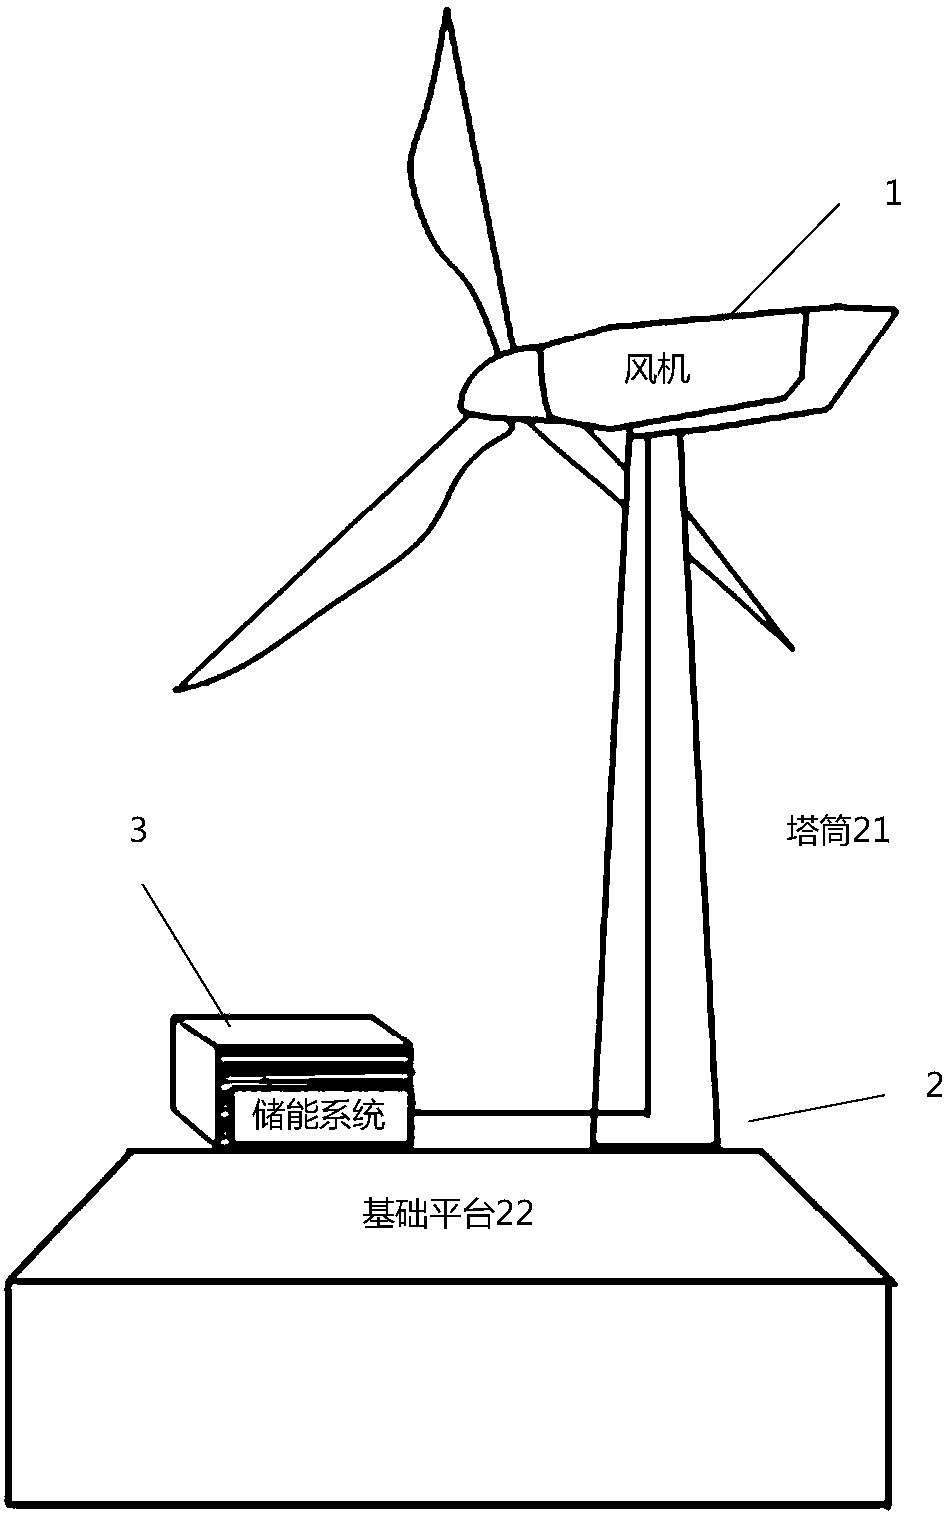 Control method of energy storage system for wind turbine generation set and communication management system